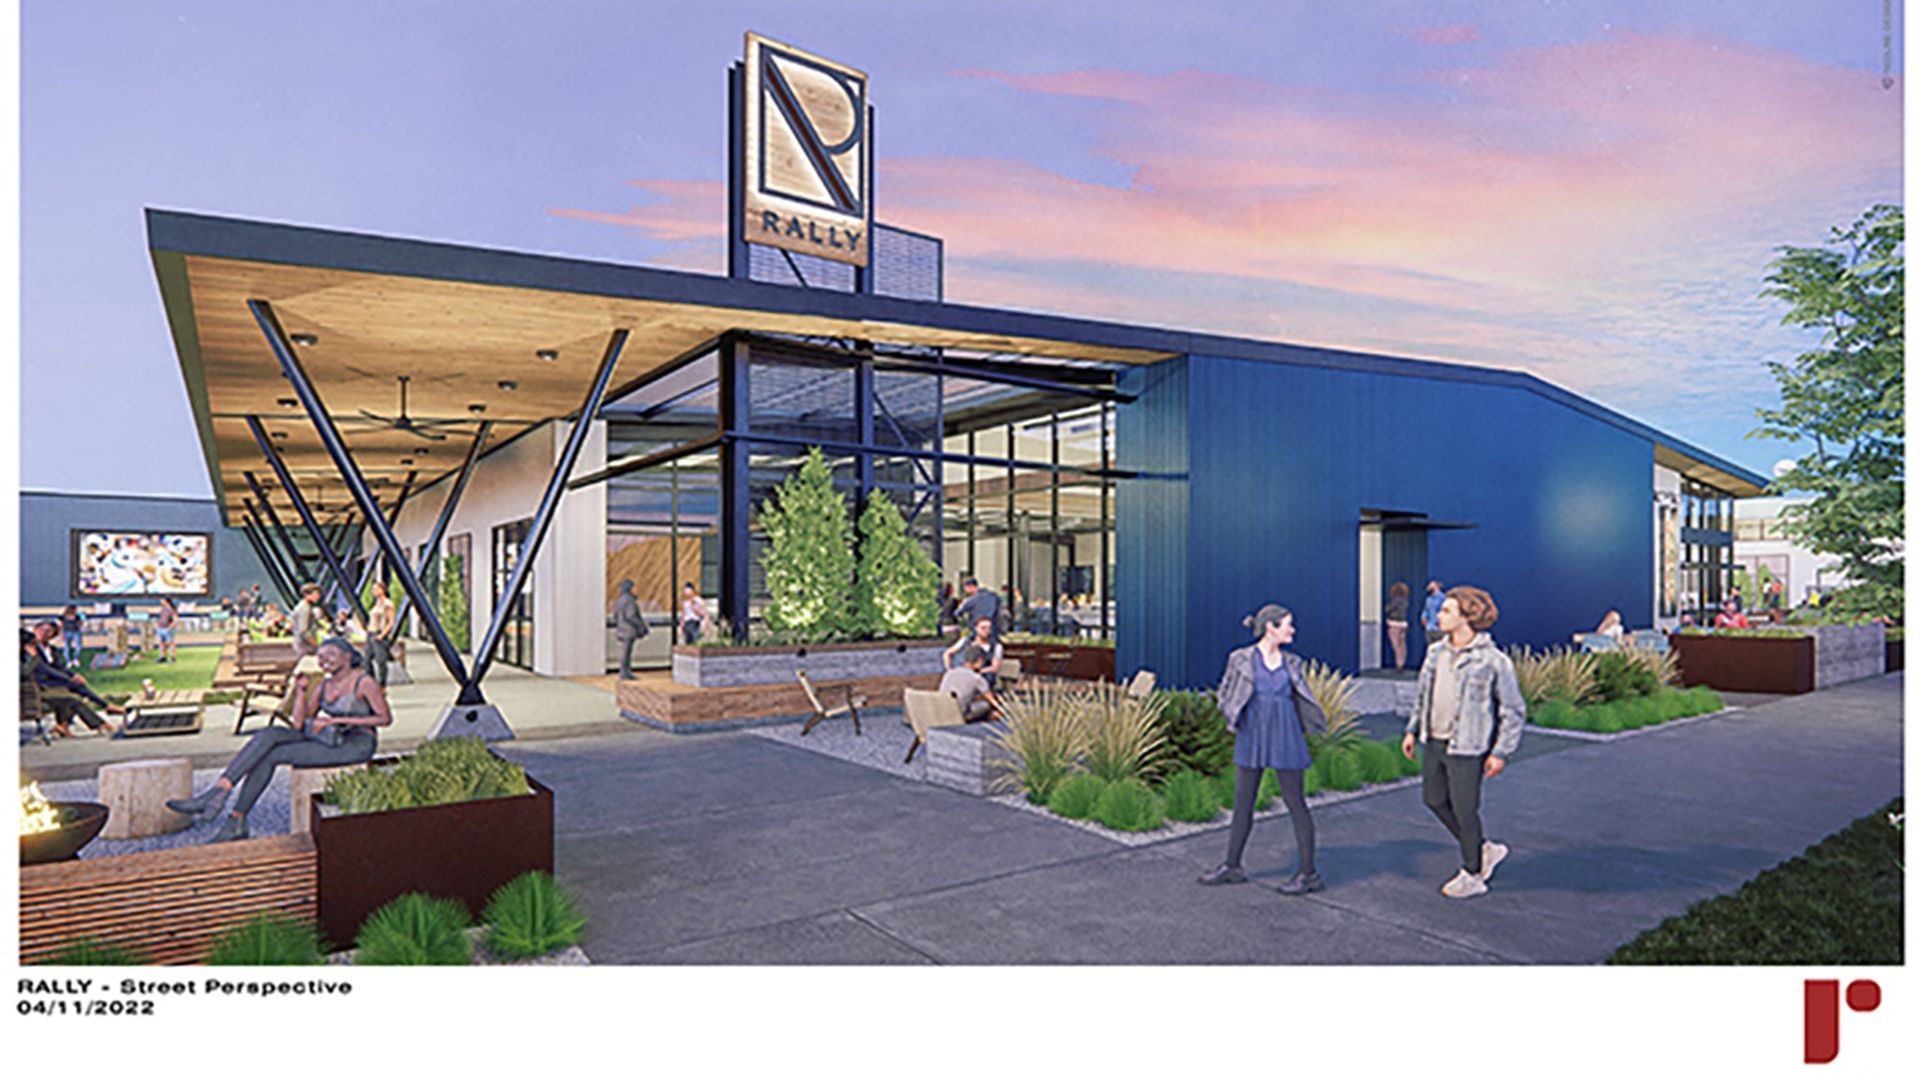 Rendering of a future pickleball "experience" facility.